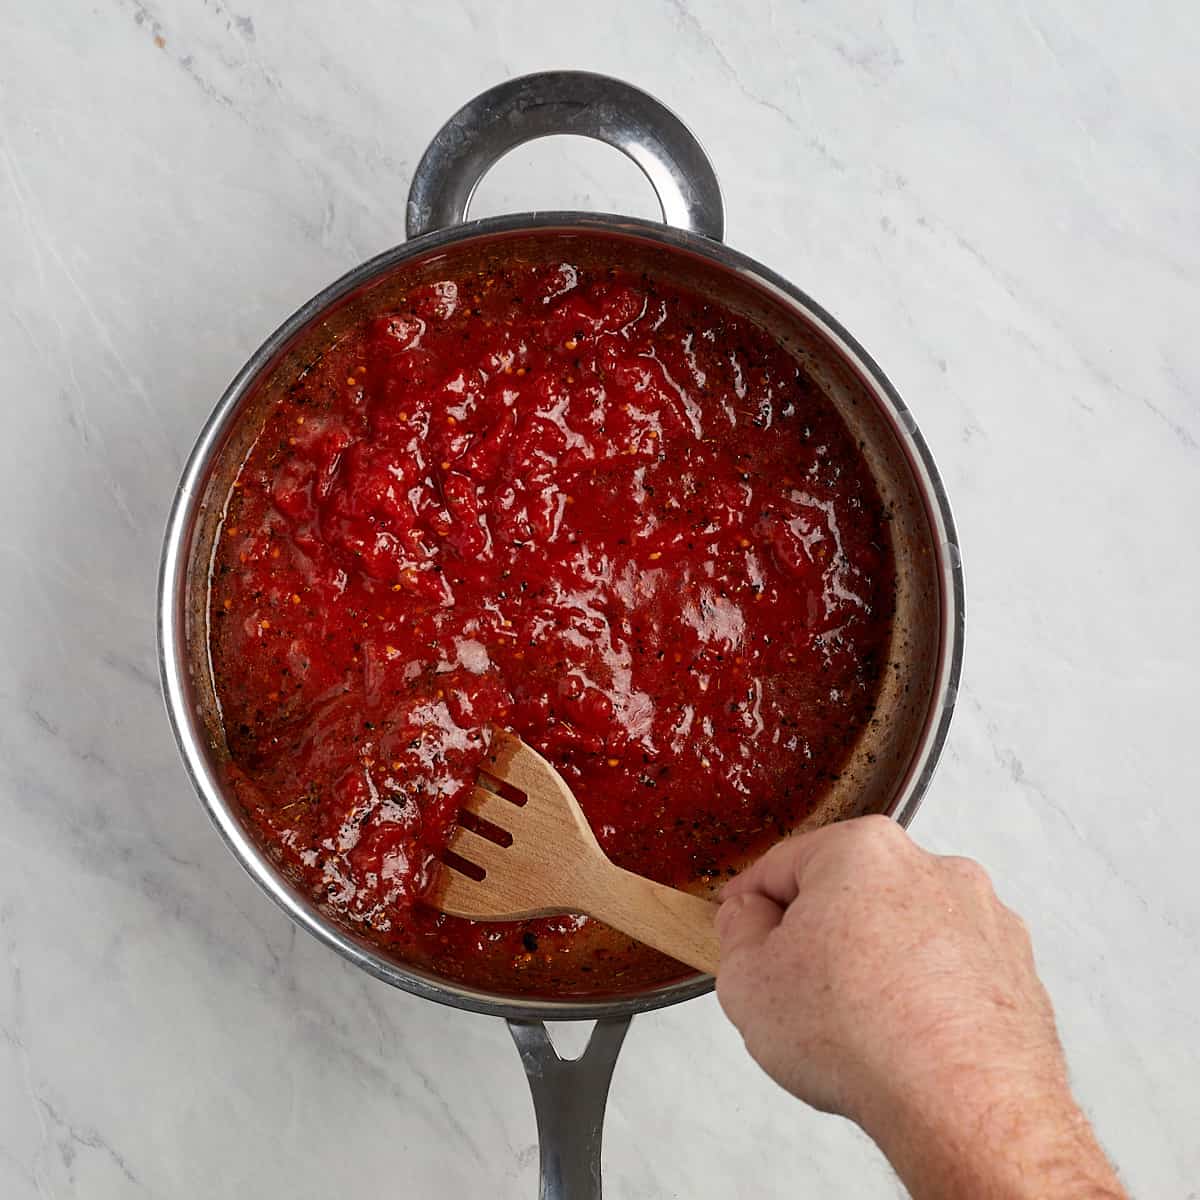 tomatoes in a skillet with the olive oil and spices being stirred with a wooden spoon.